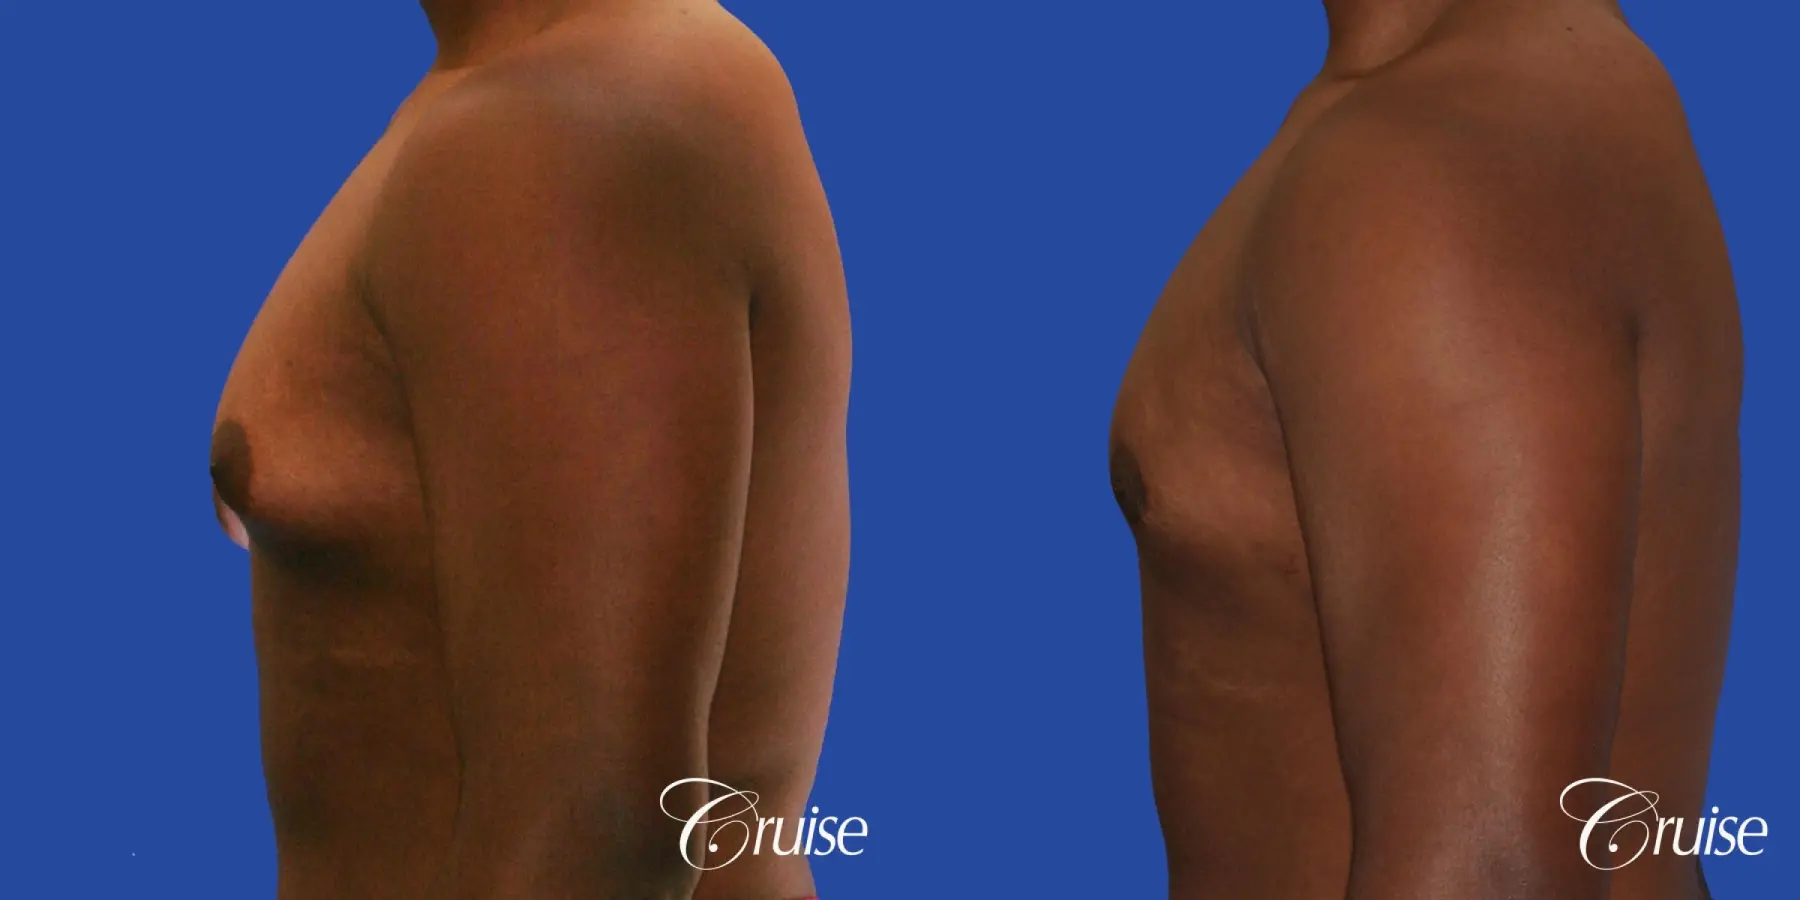 male breast moderate gynecomastia on young teen - Before and After 2